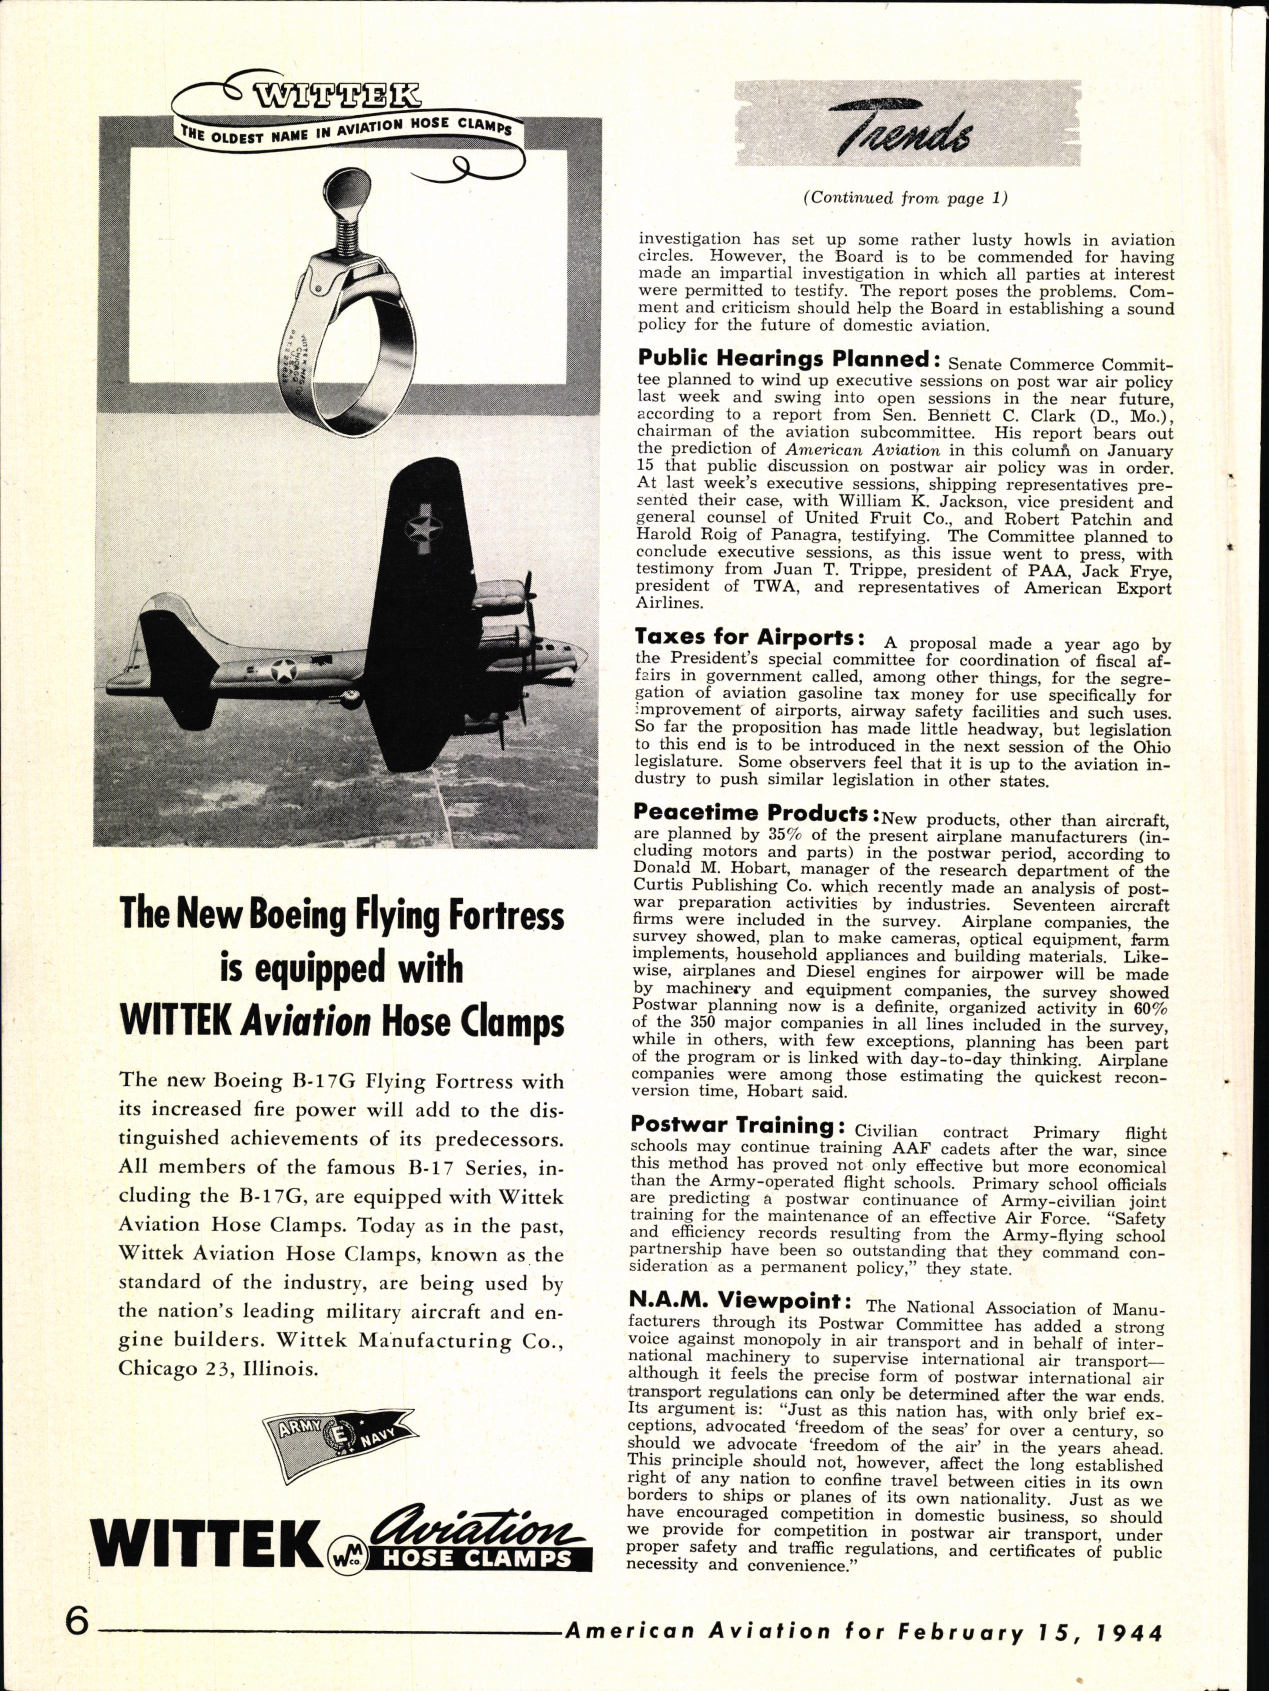 Sample page 6 from AirCorps Library document: American Aviation Magazine - Volume 7 - No. 18